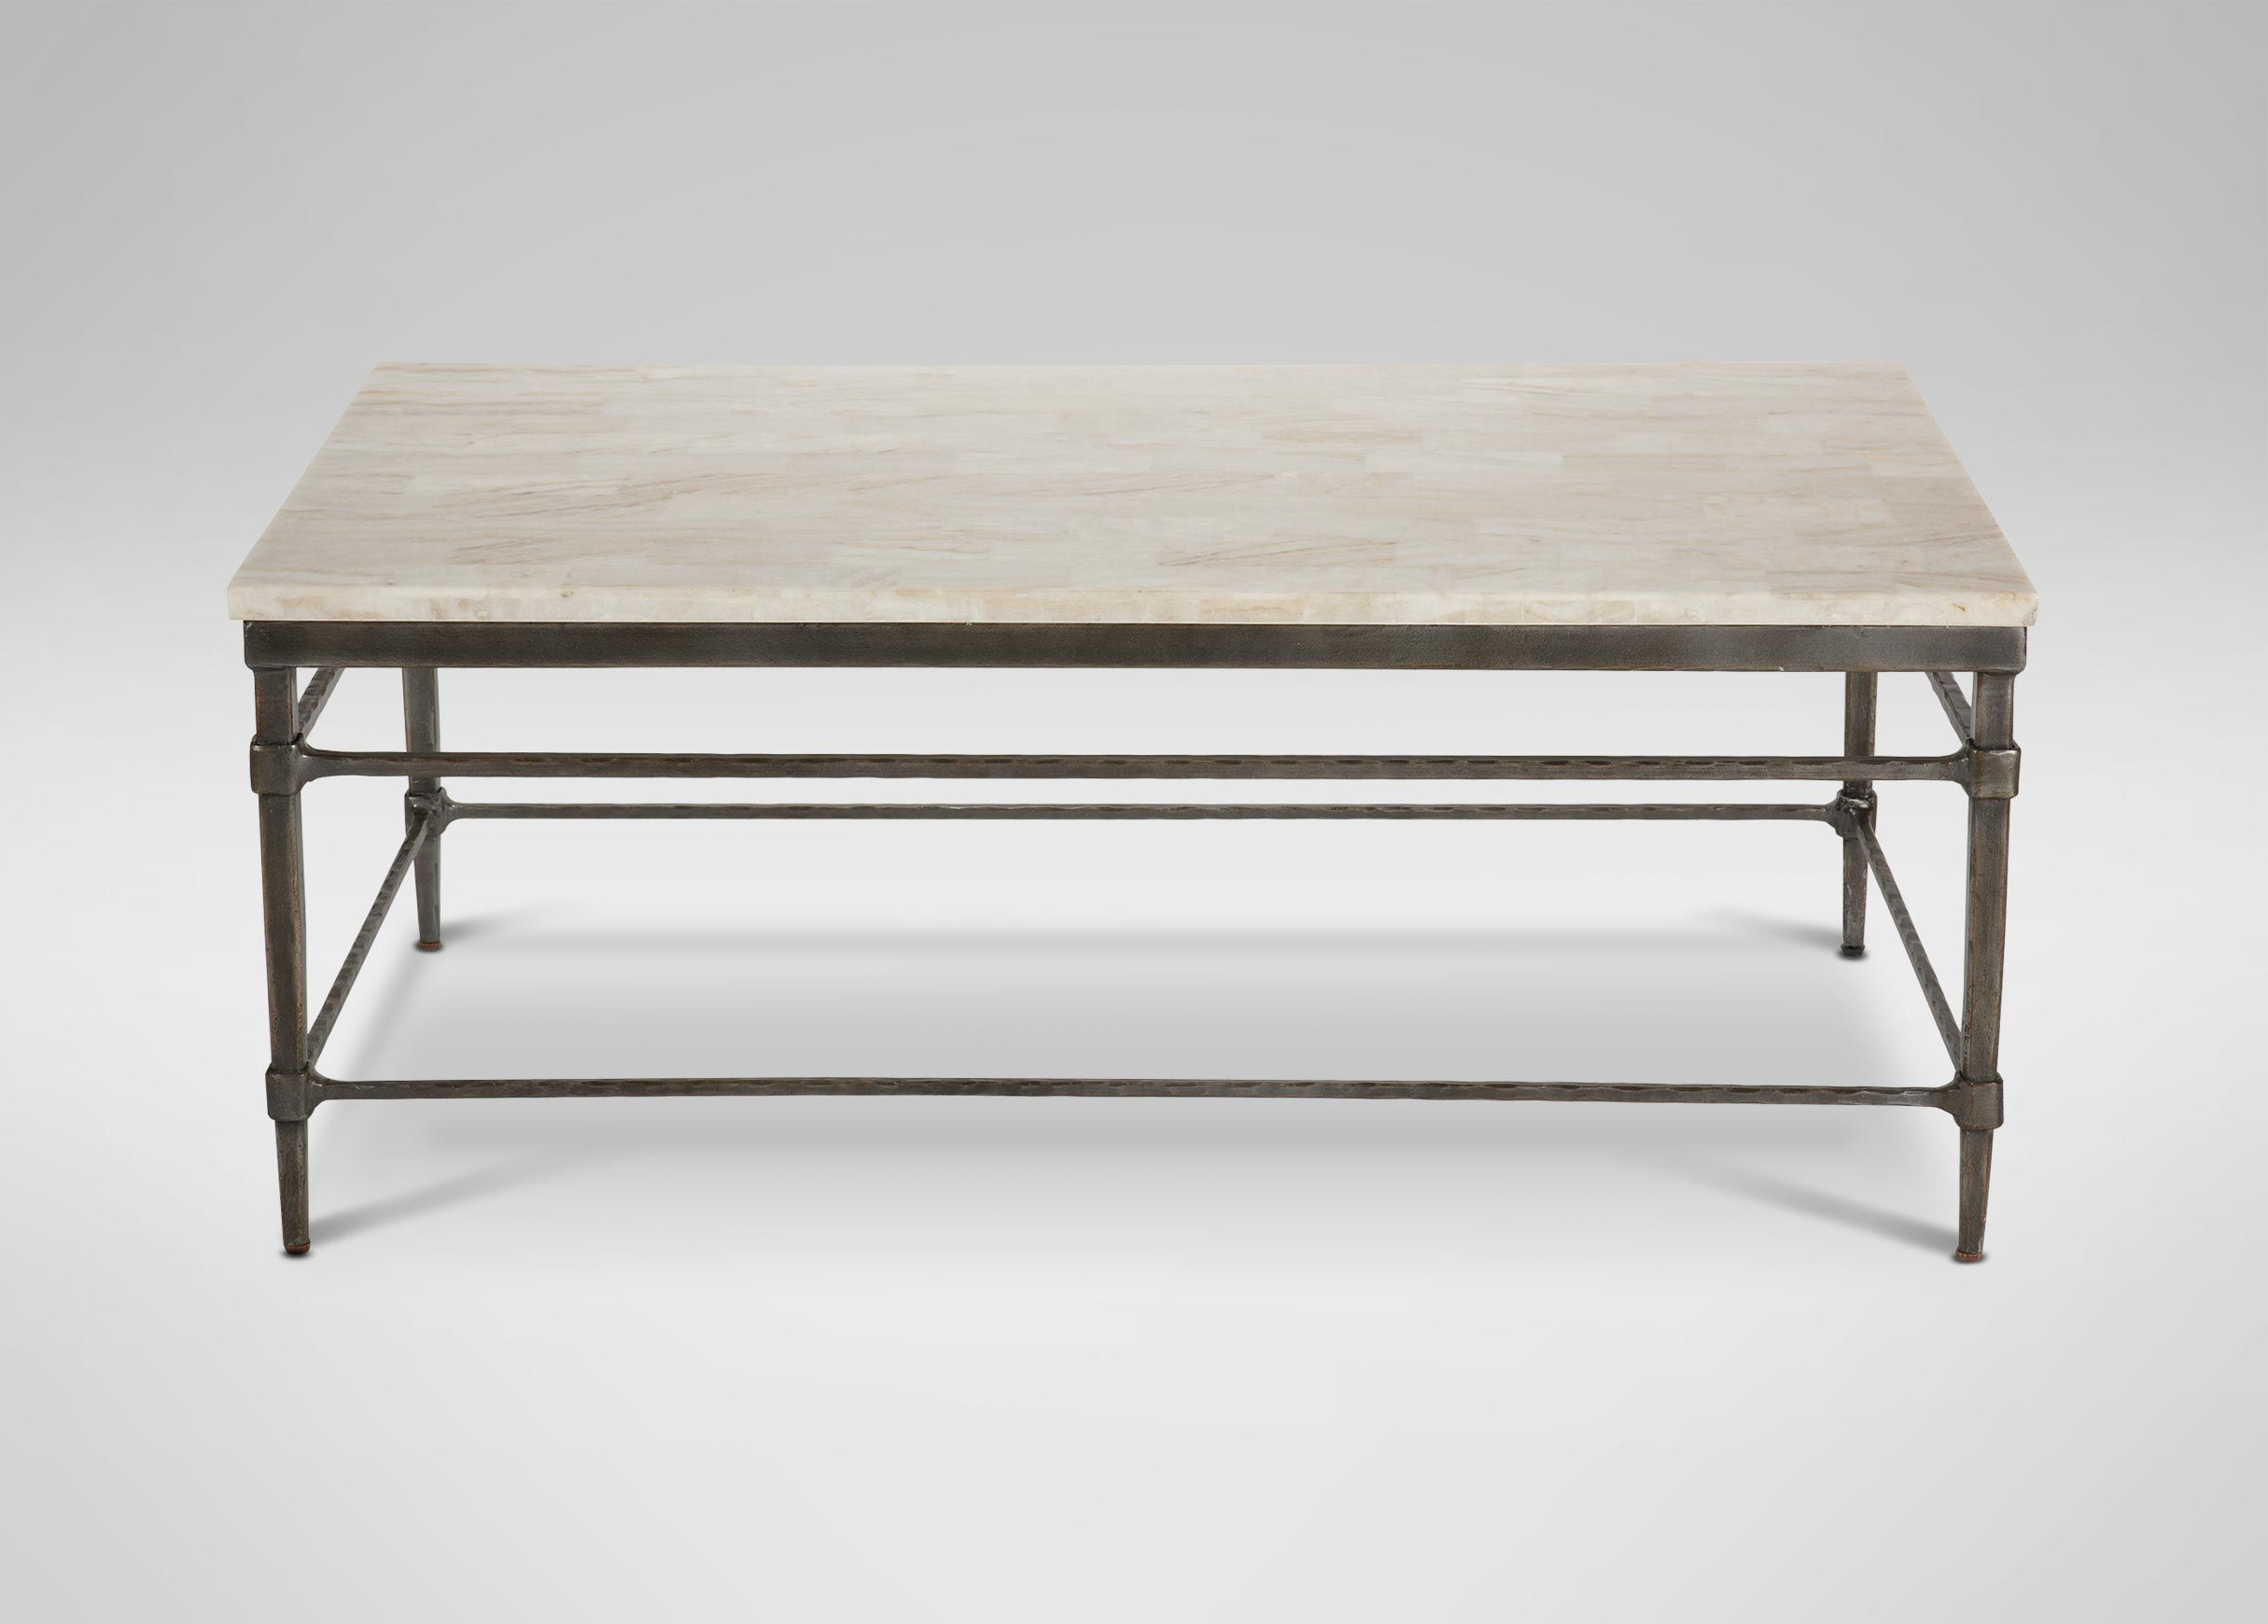 Stone Top Coffee Tables